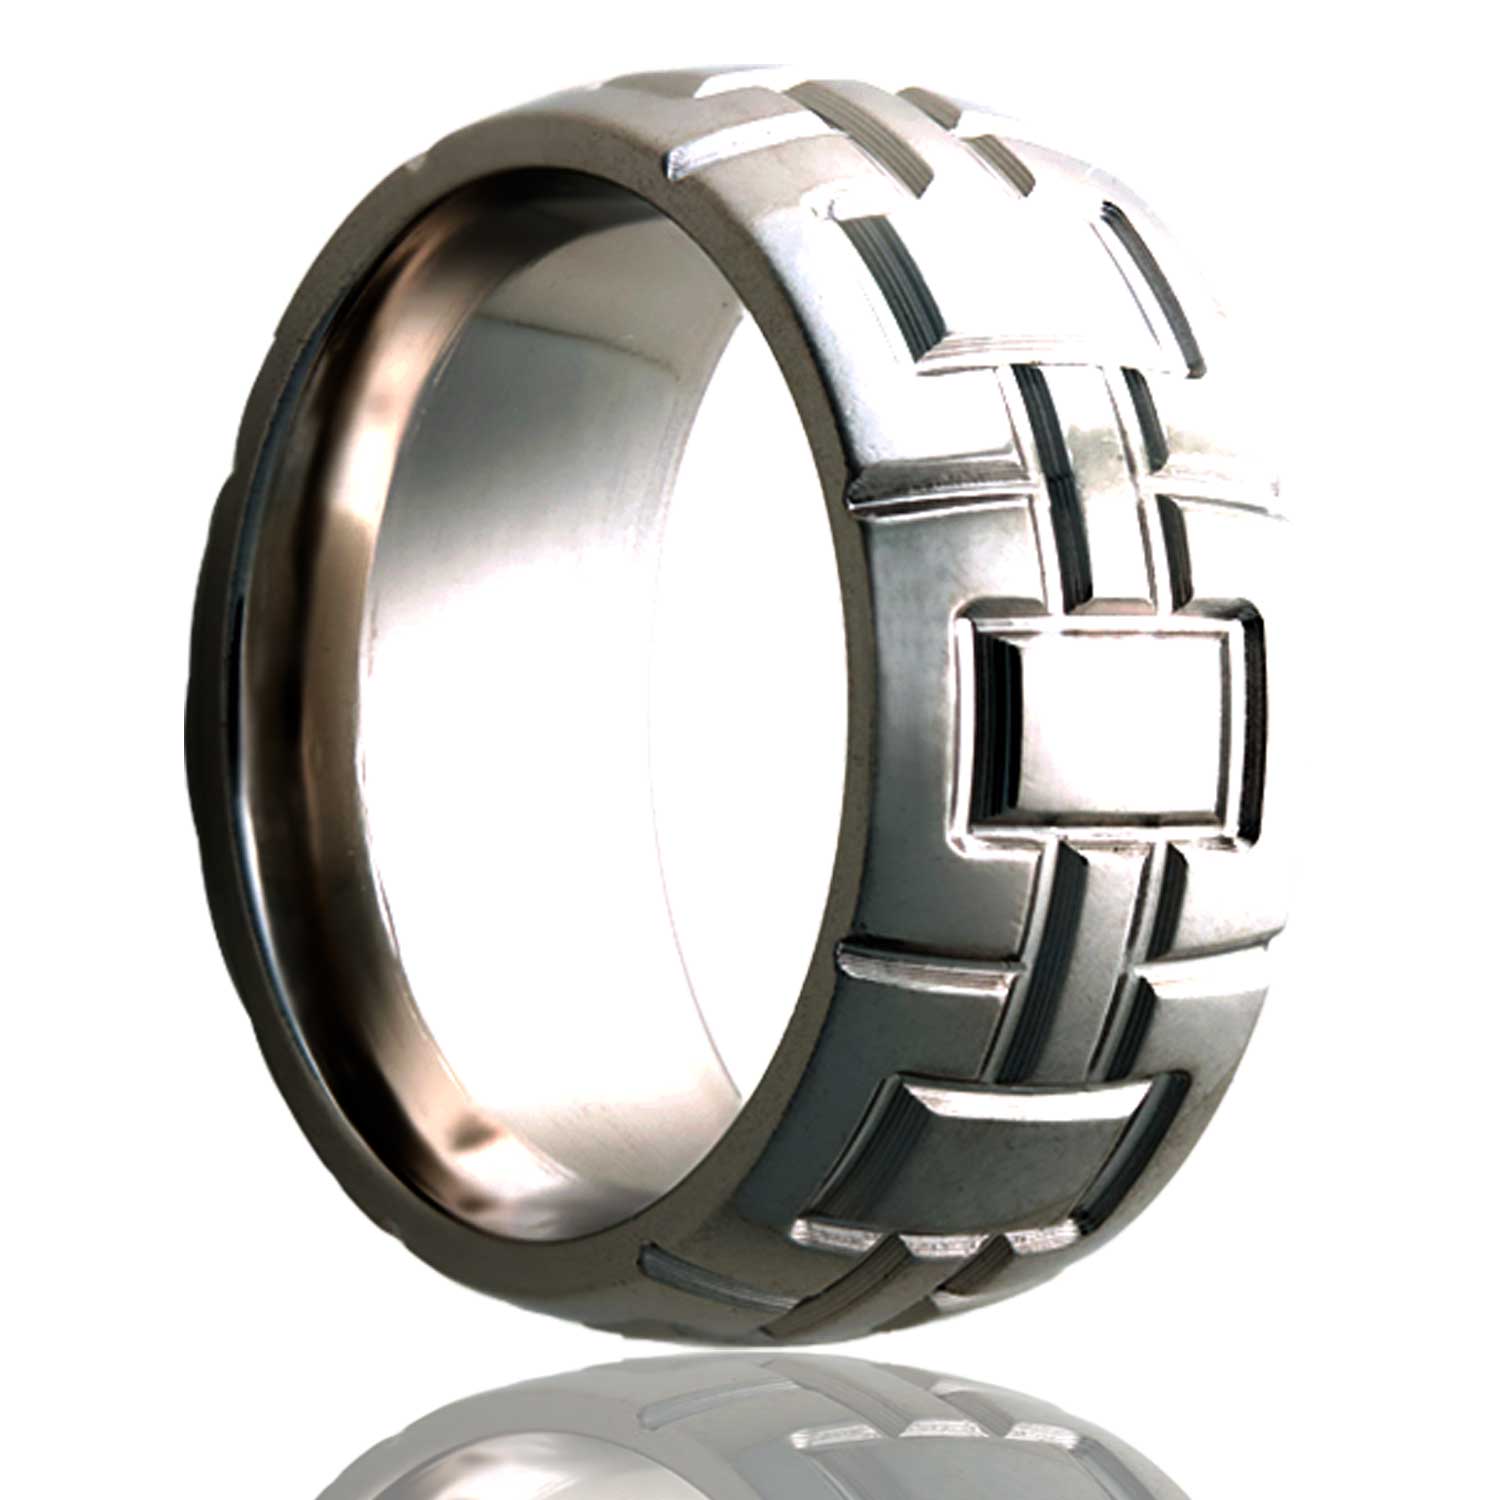 A geometric cube pattern domed cobalt wedding band displayed on a neutral white background.